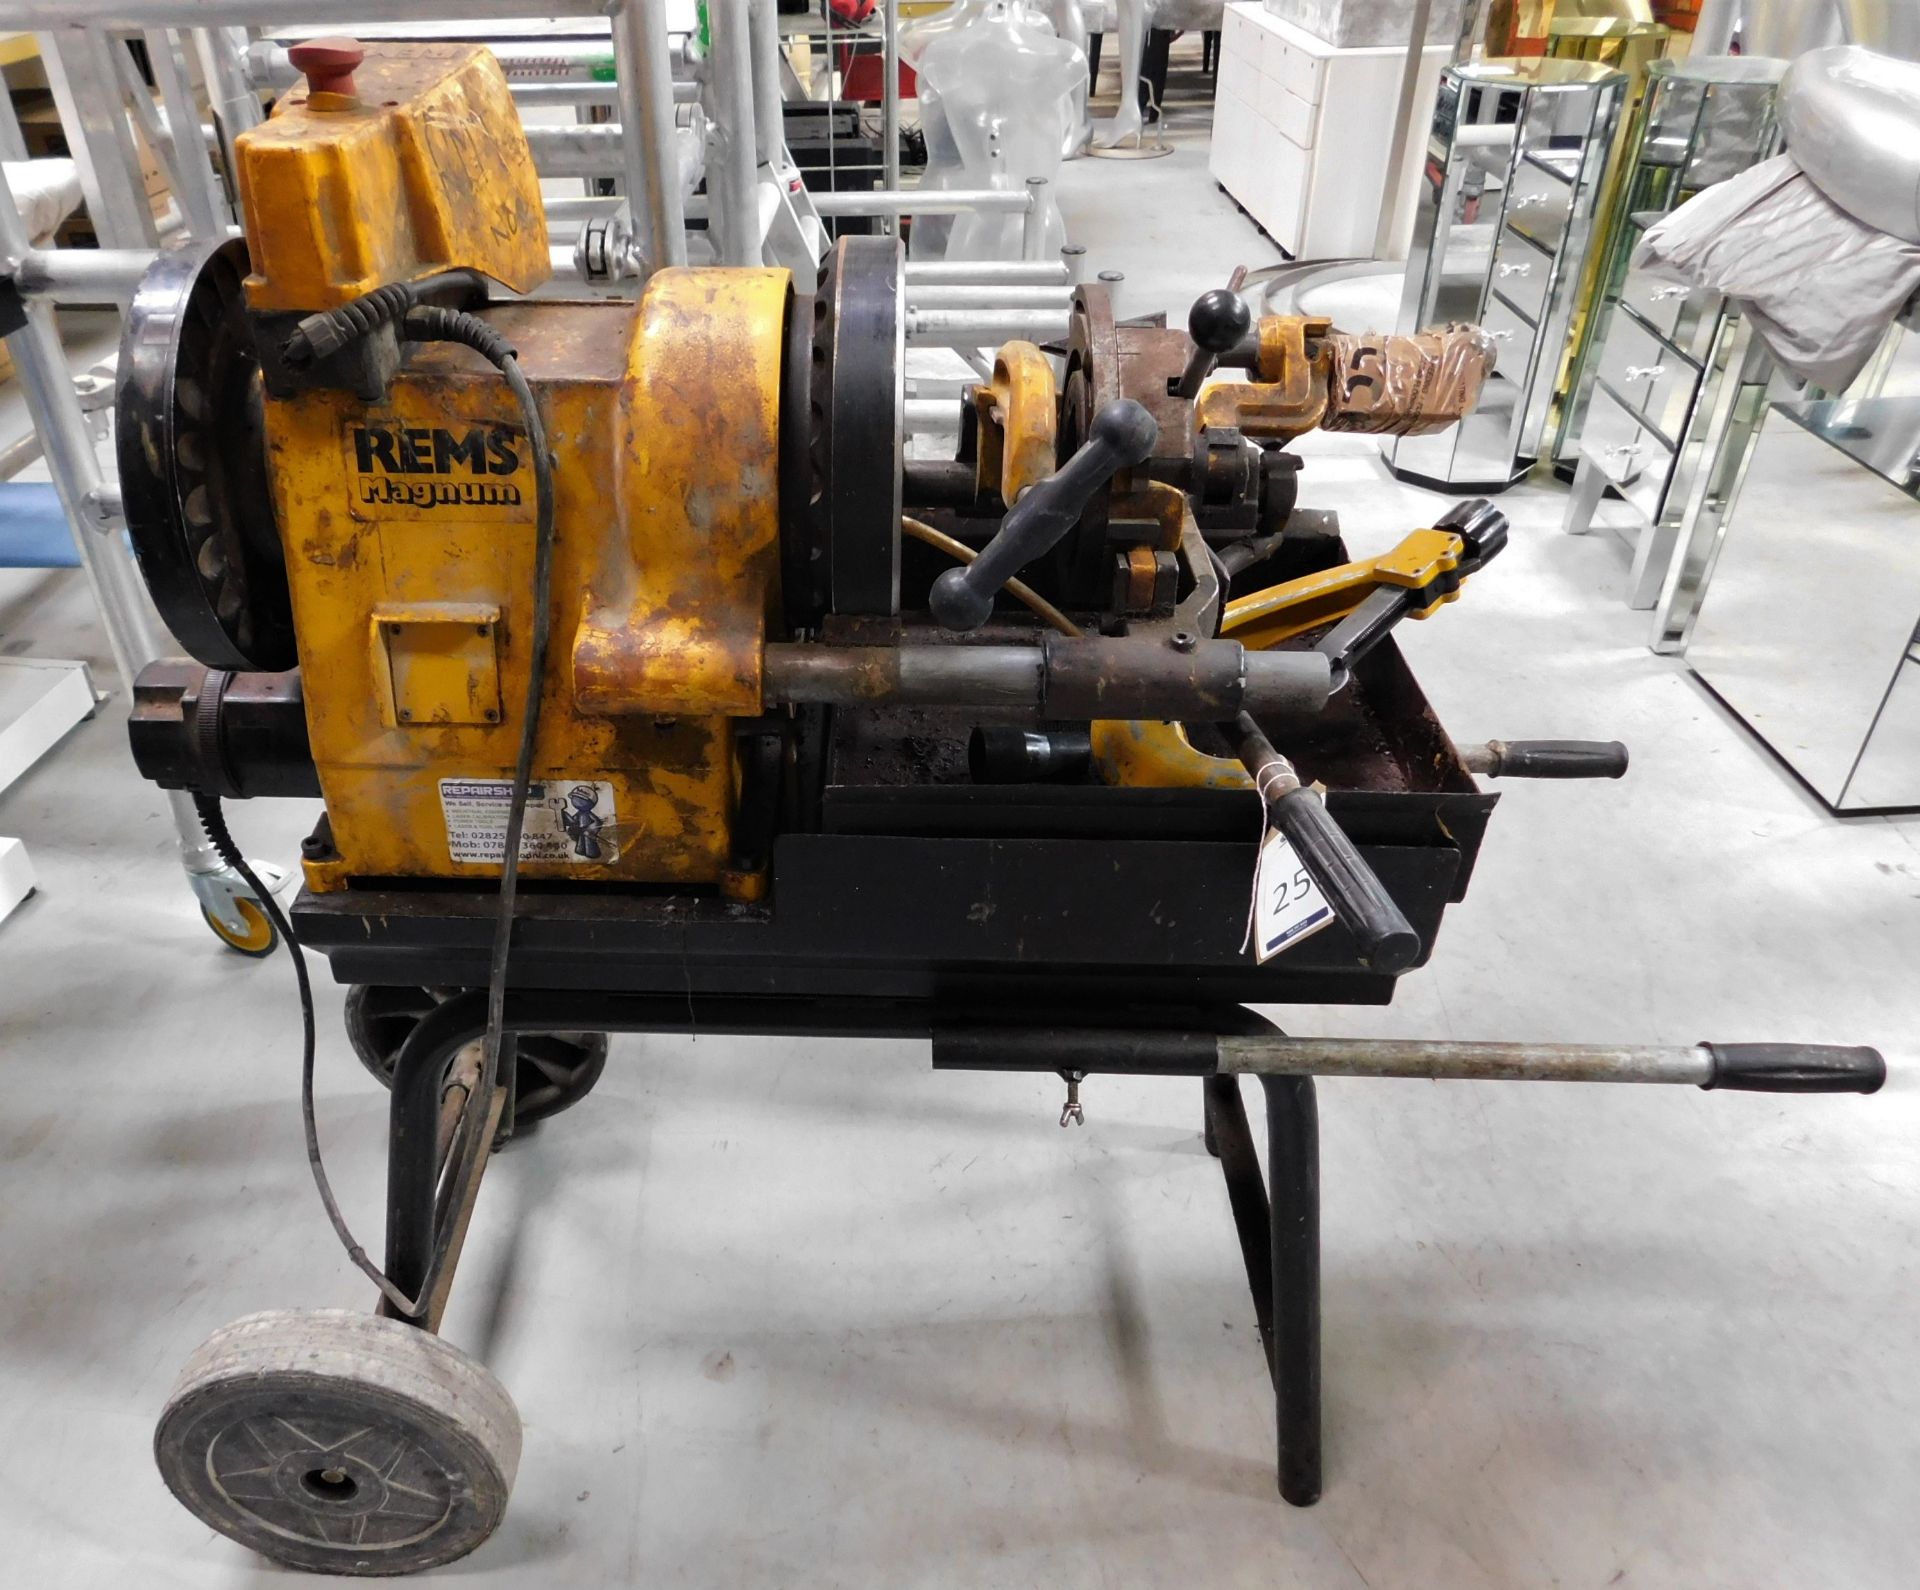 REMS Magnum Type 4000 Pipe Threader, Serial Number 38411645 on Wheeled Stand (Location: Brentwood.